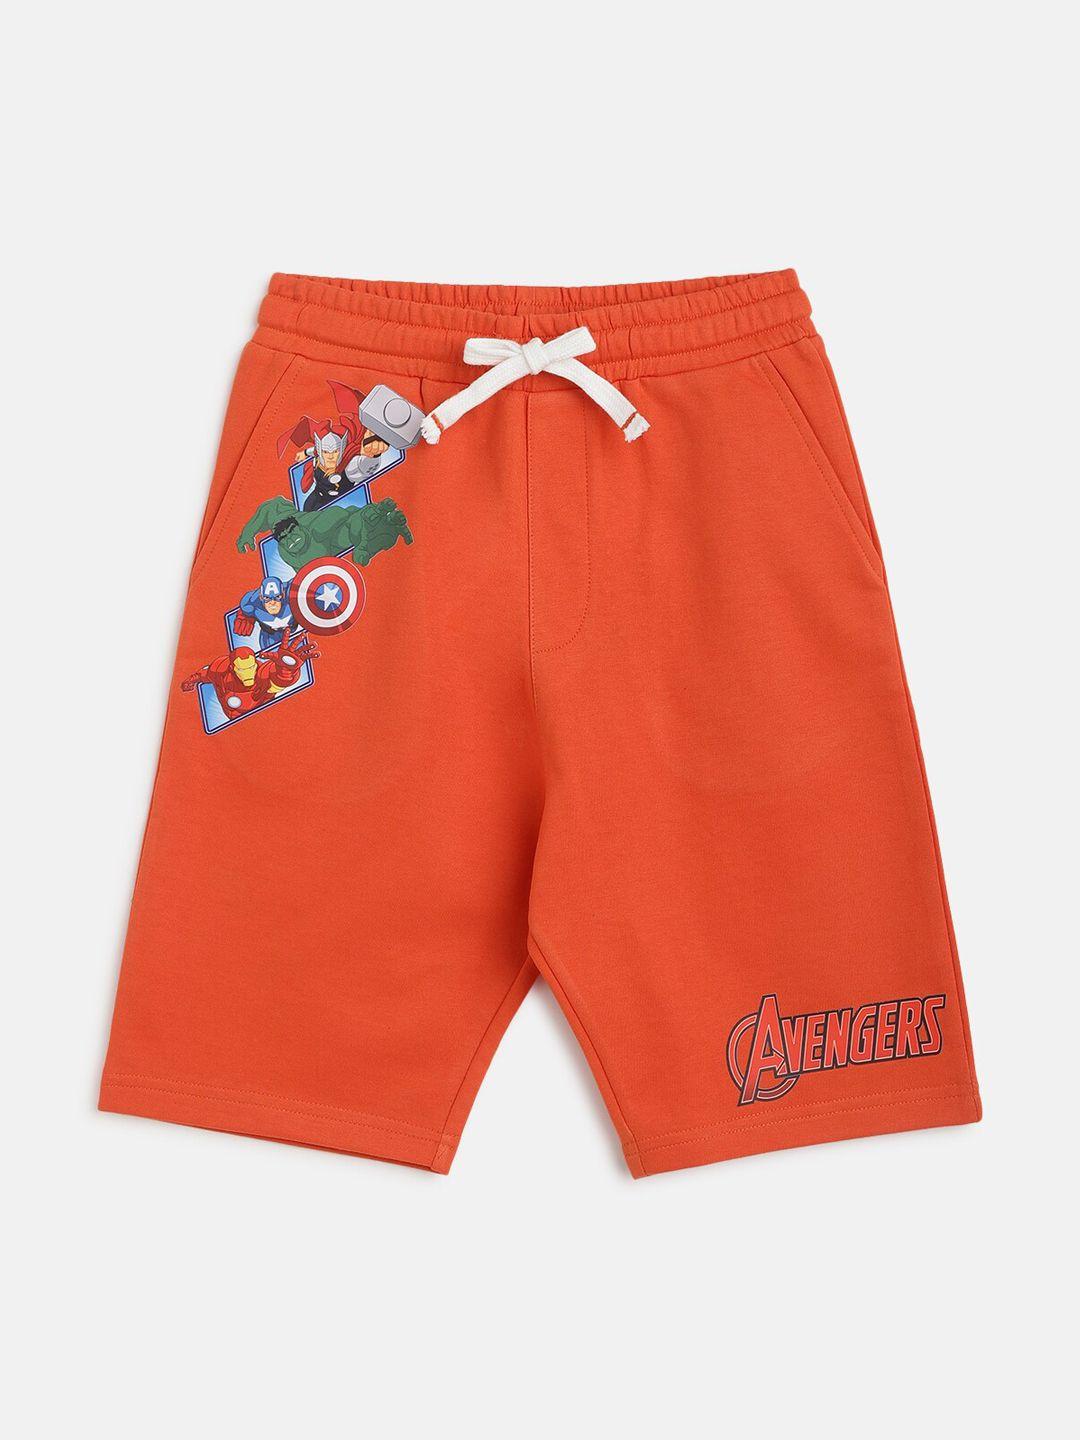 lil-tomatoes-boys-orange-printed-avengers-cotton-outdoor-shorts